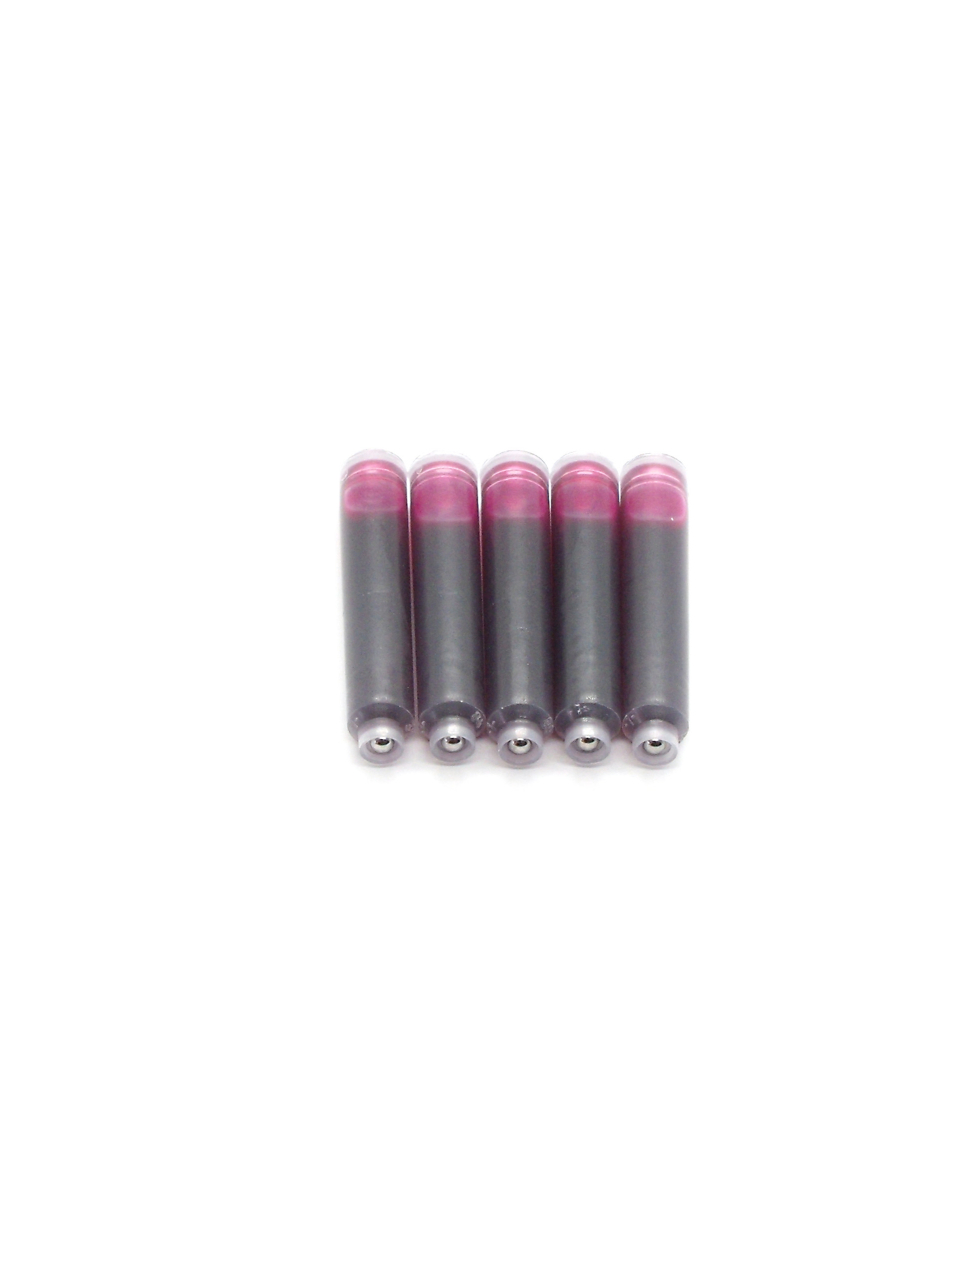 Top Ink Cartridges For Haolilai Fountain Pens (Pink)